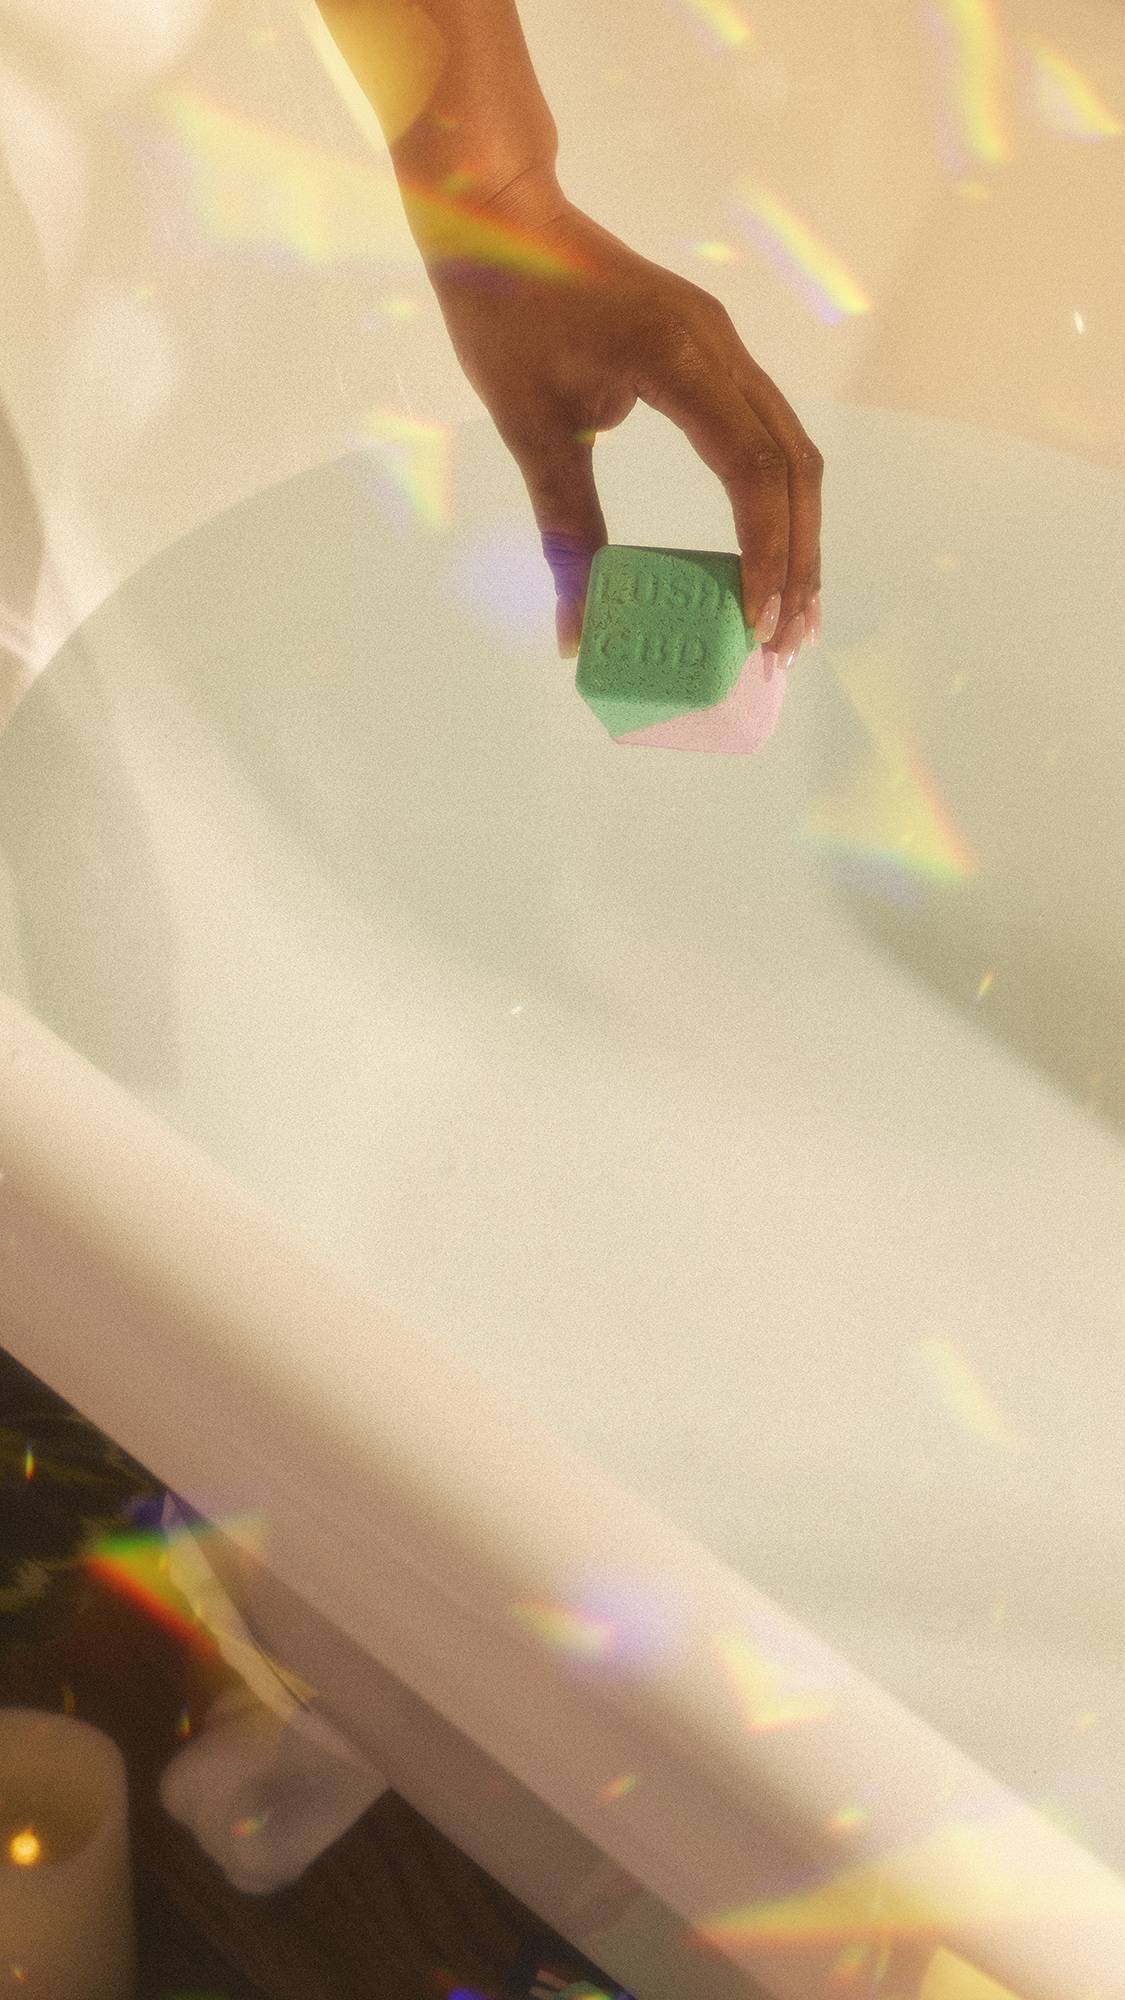 A close-up of the model's hand holding the Magik CBD Epson Salt bath bomb over the still bath water in the tub. The image has flecks of rainbow reflections on a warm, sepia tone.